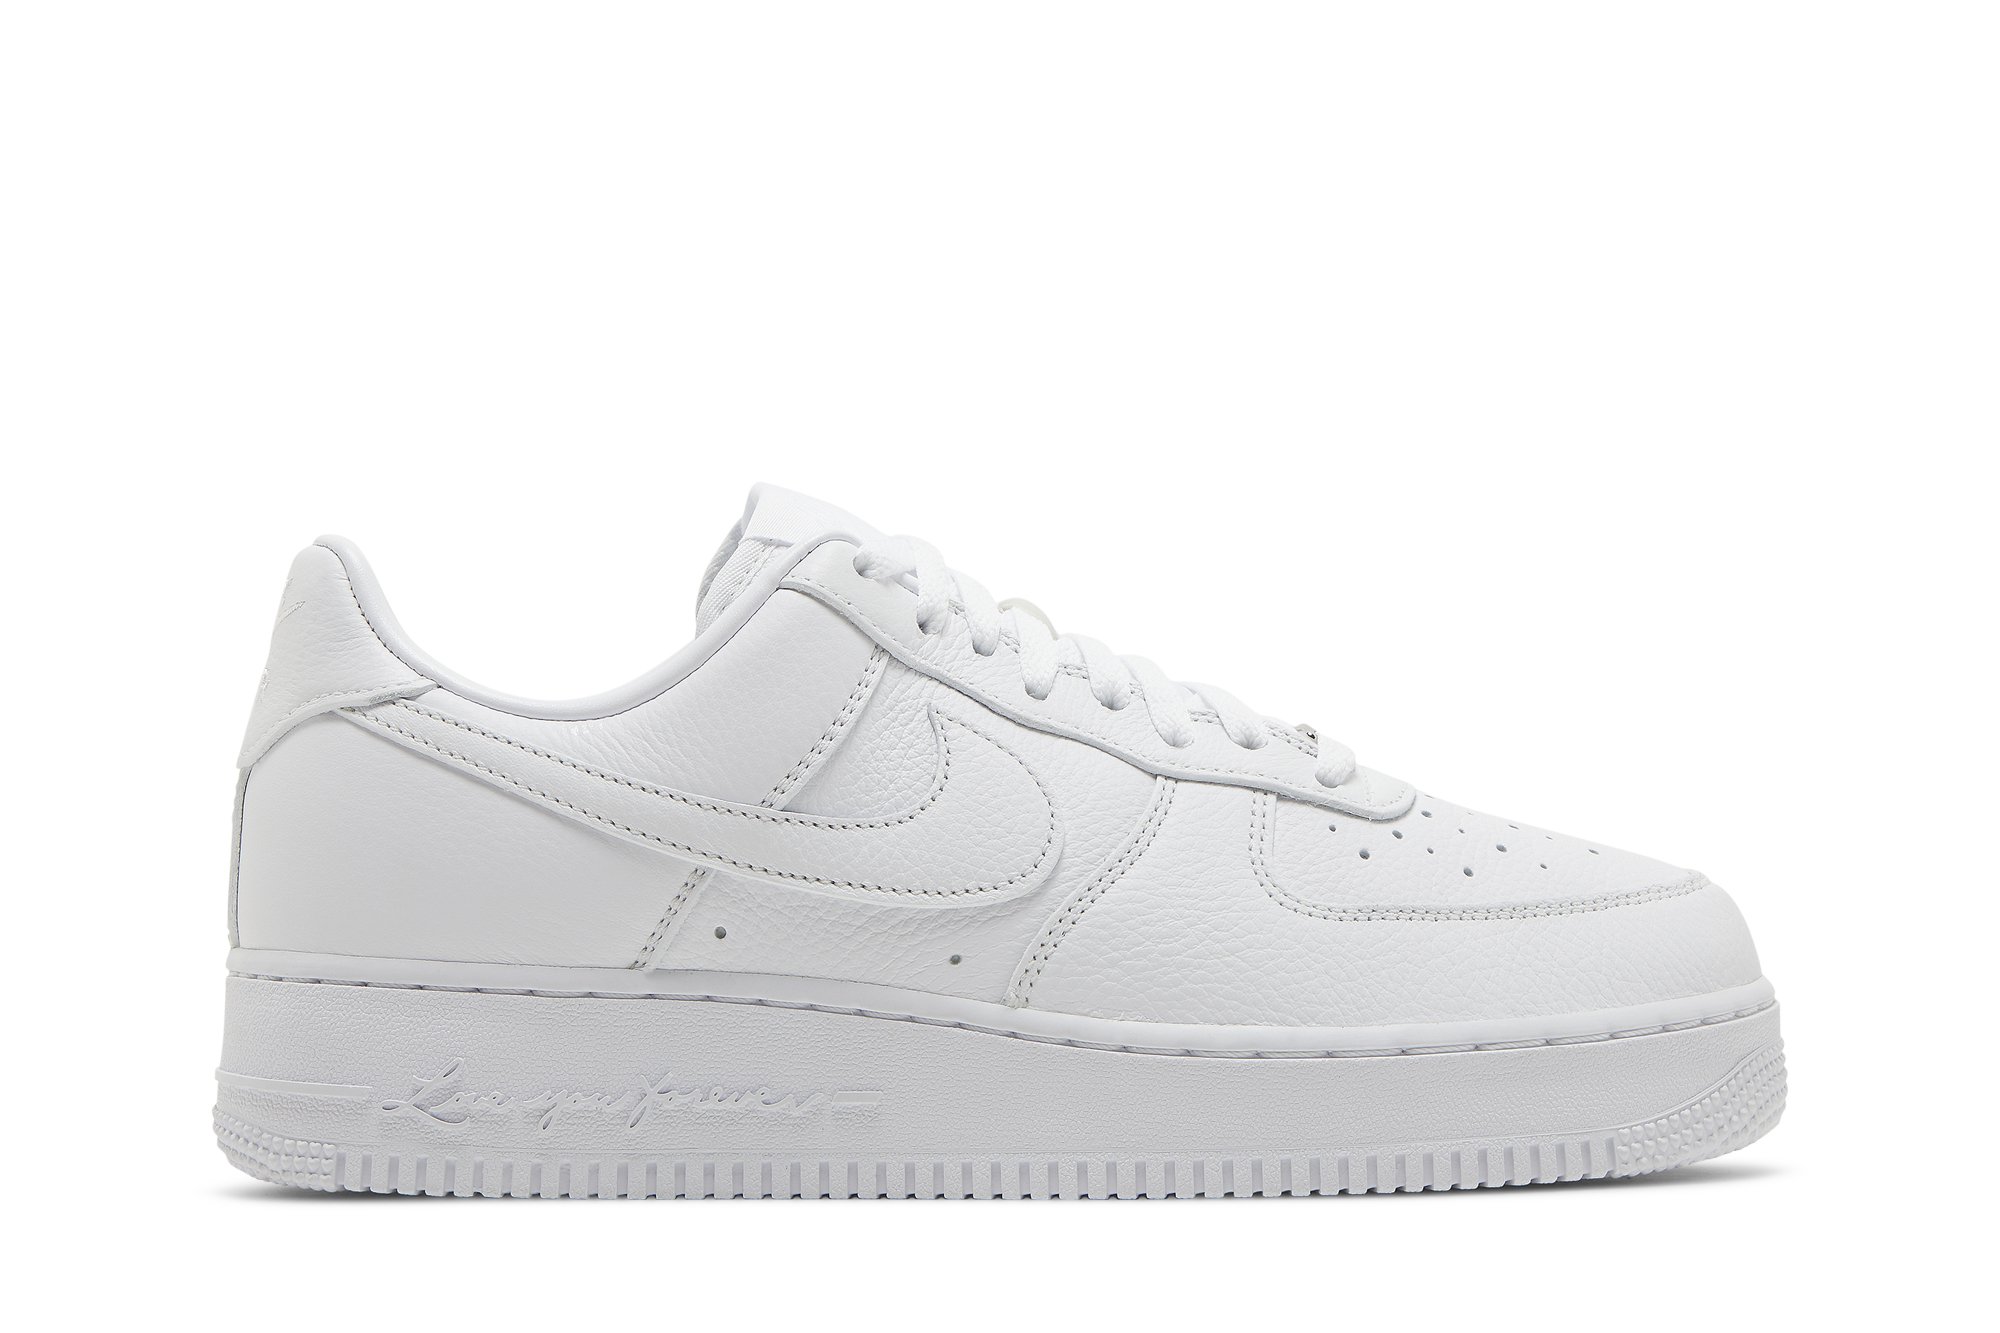 NOCTA x Air Force 1 Low 'Certified Lover Boy' | GOAT